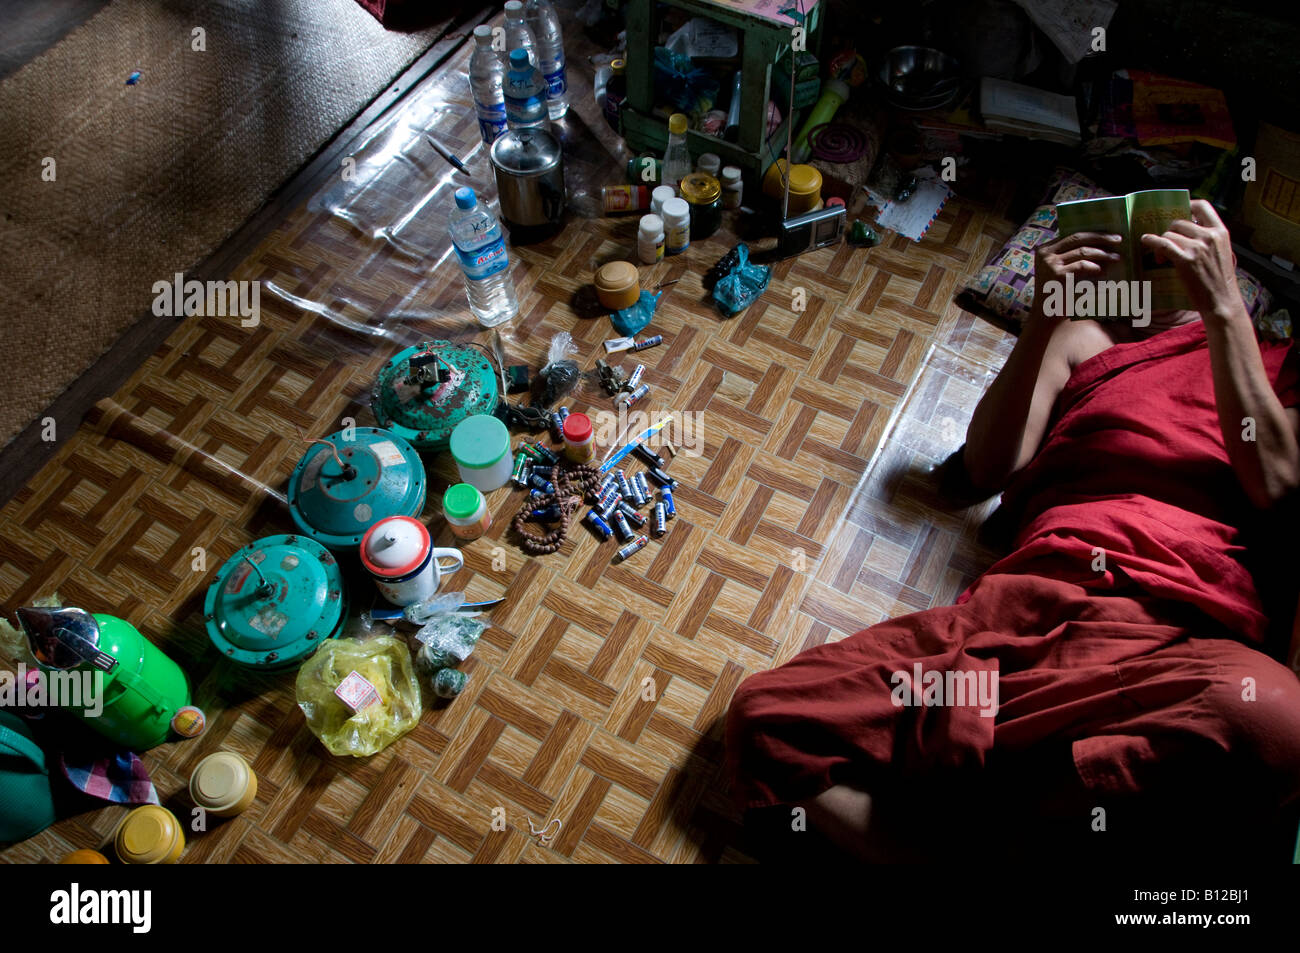 Bhikkhu Buddhist monk reading a book in a monastery in Kyauktan township of Yangon in the Republic of the Union of Myanmar Stock Photo